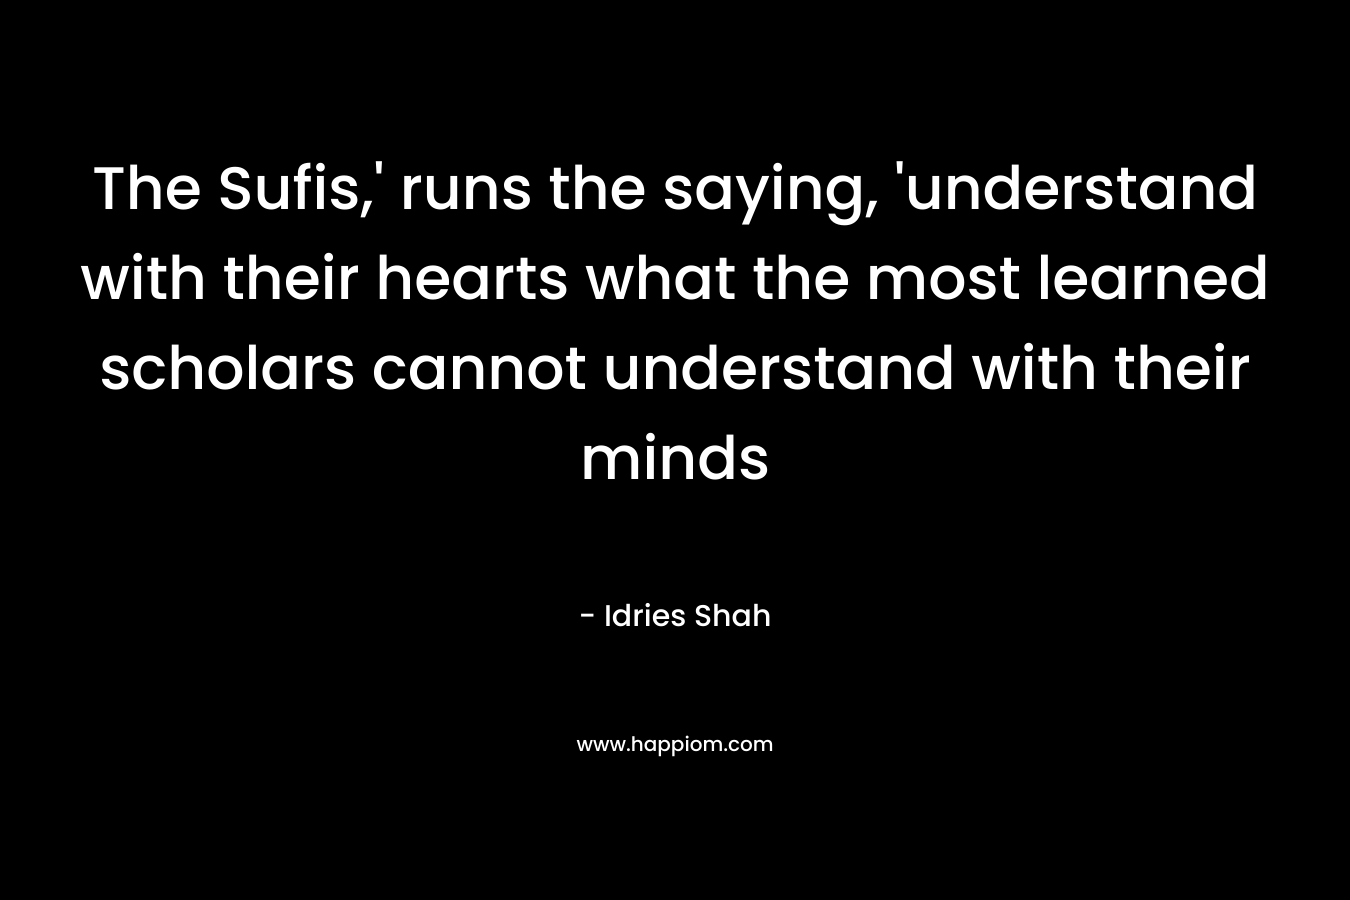 The Sufis,' runs the saying, 'understand with their hearts what the most learned scholars cannot understand with their minds